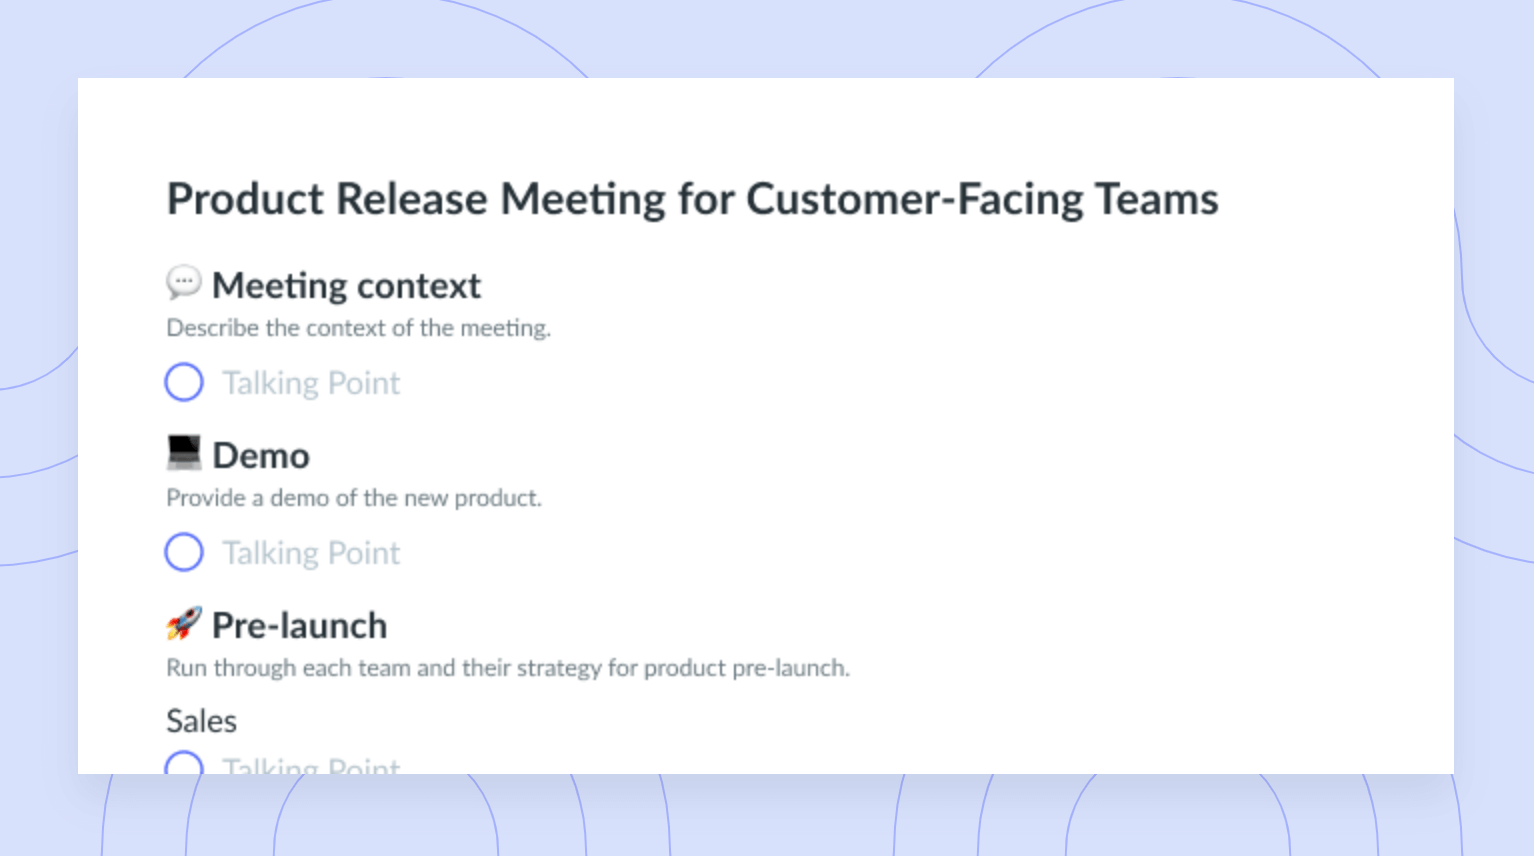 Product Release Meeting for Customer-Facing Teams Template